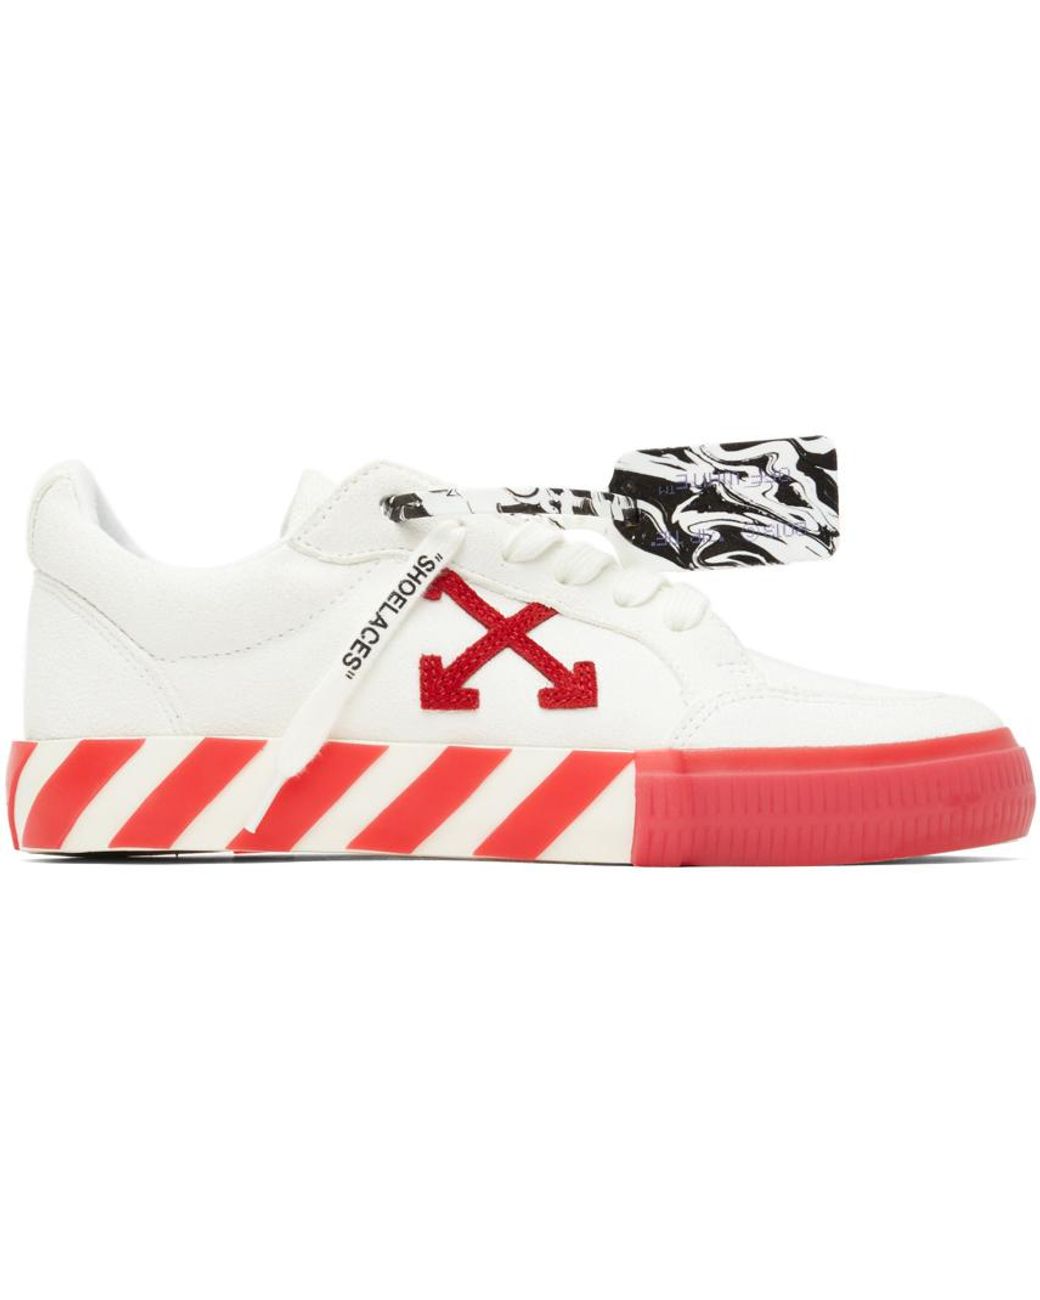 Off-White c/o Virgil Abloh Suede & Red Vulcanized Low Sneakers - Lyst